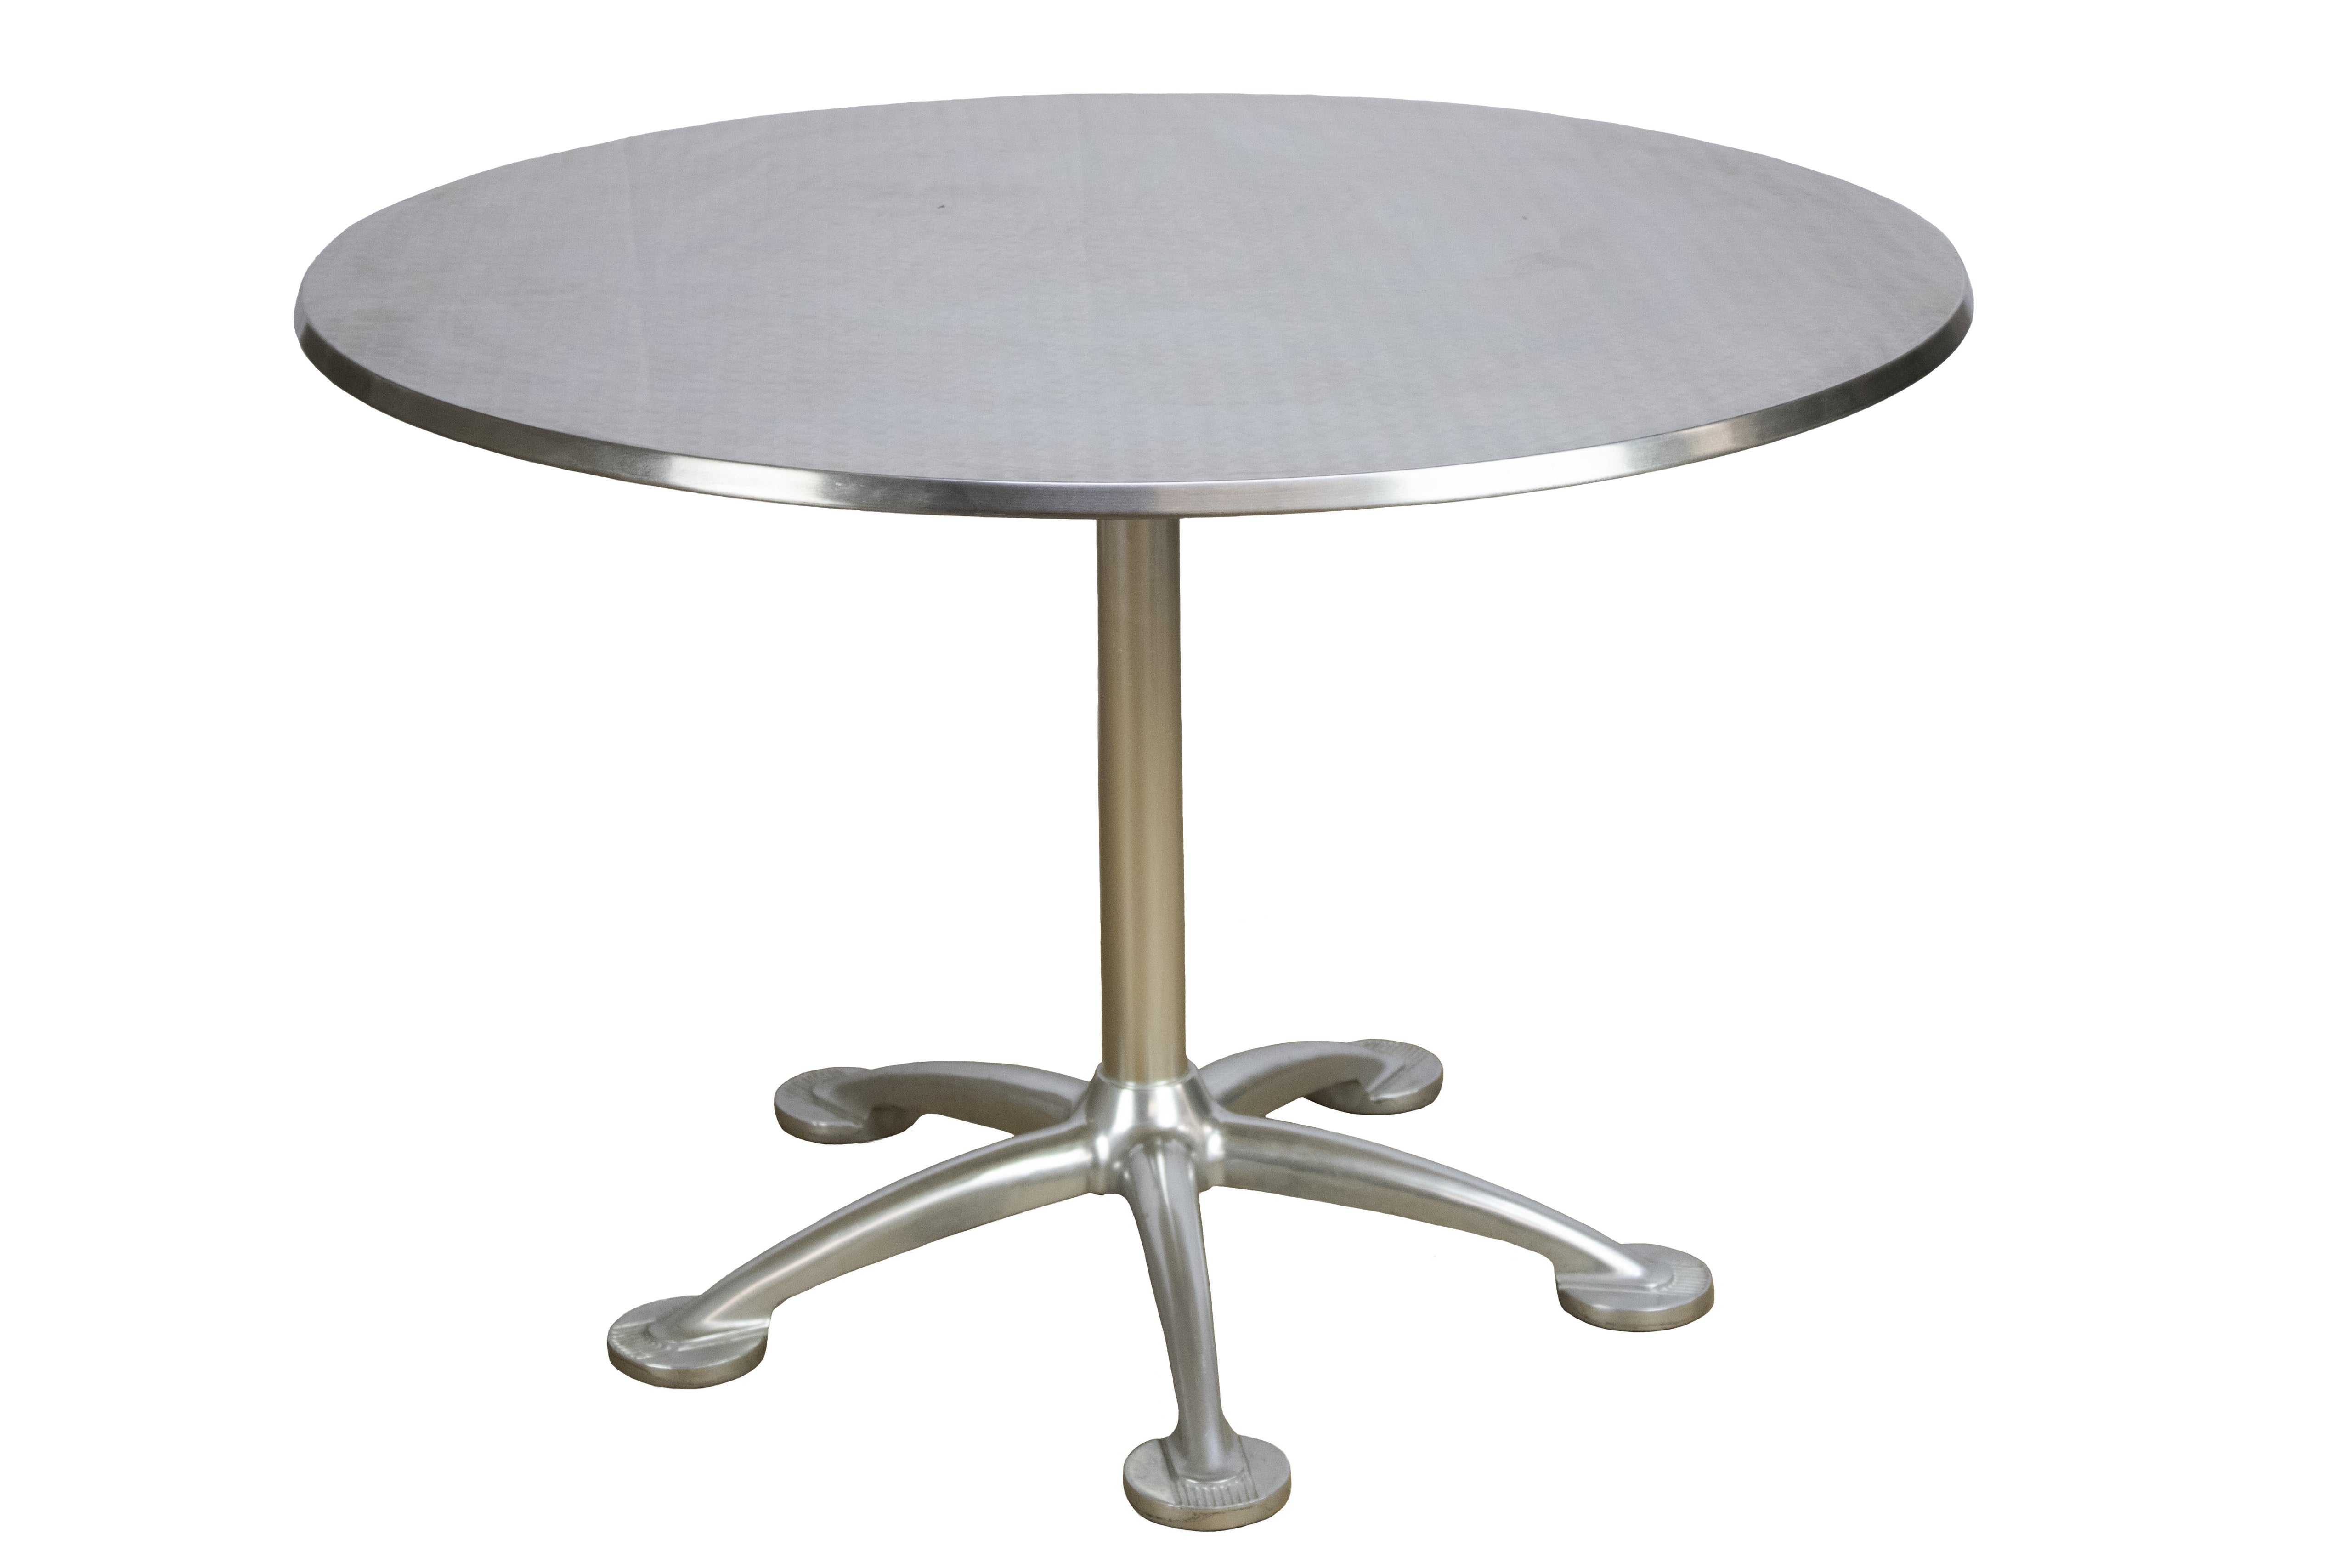 Jorge Pensi Knoll Round Dining Table 42" - Preowned